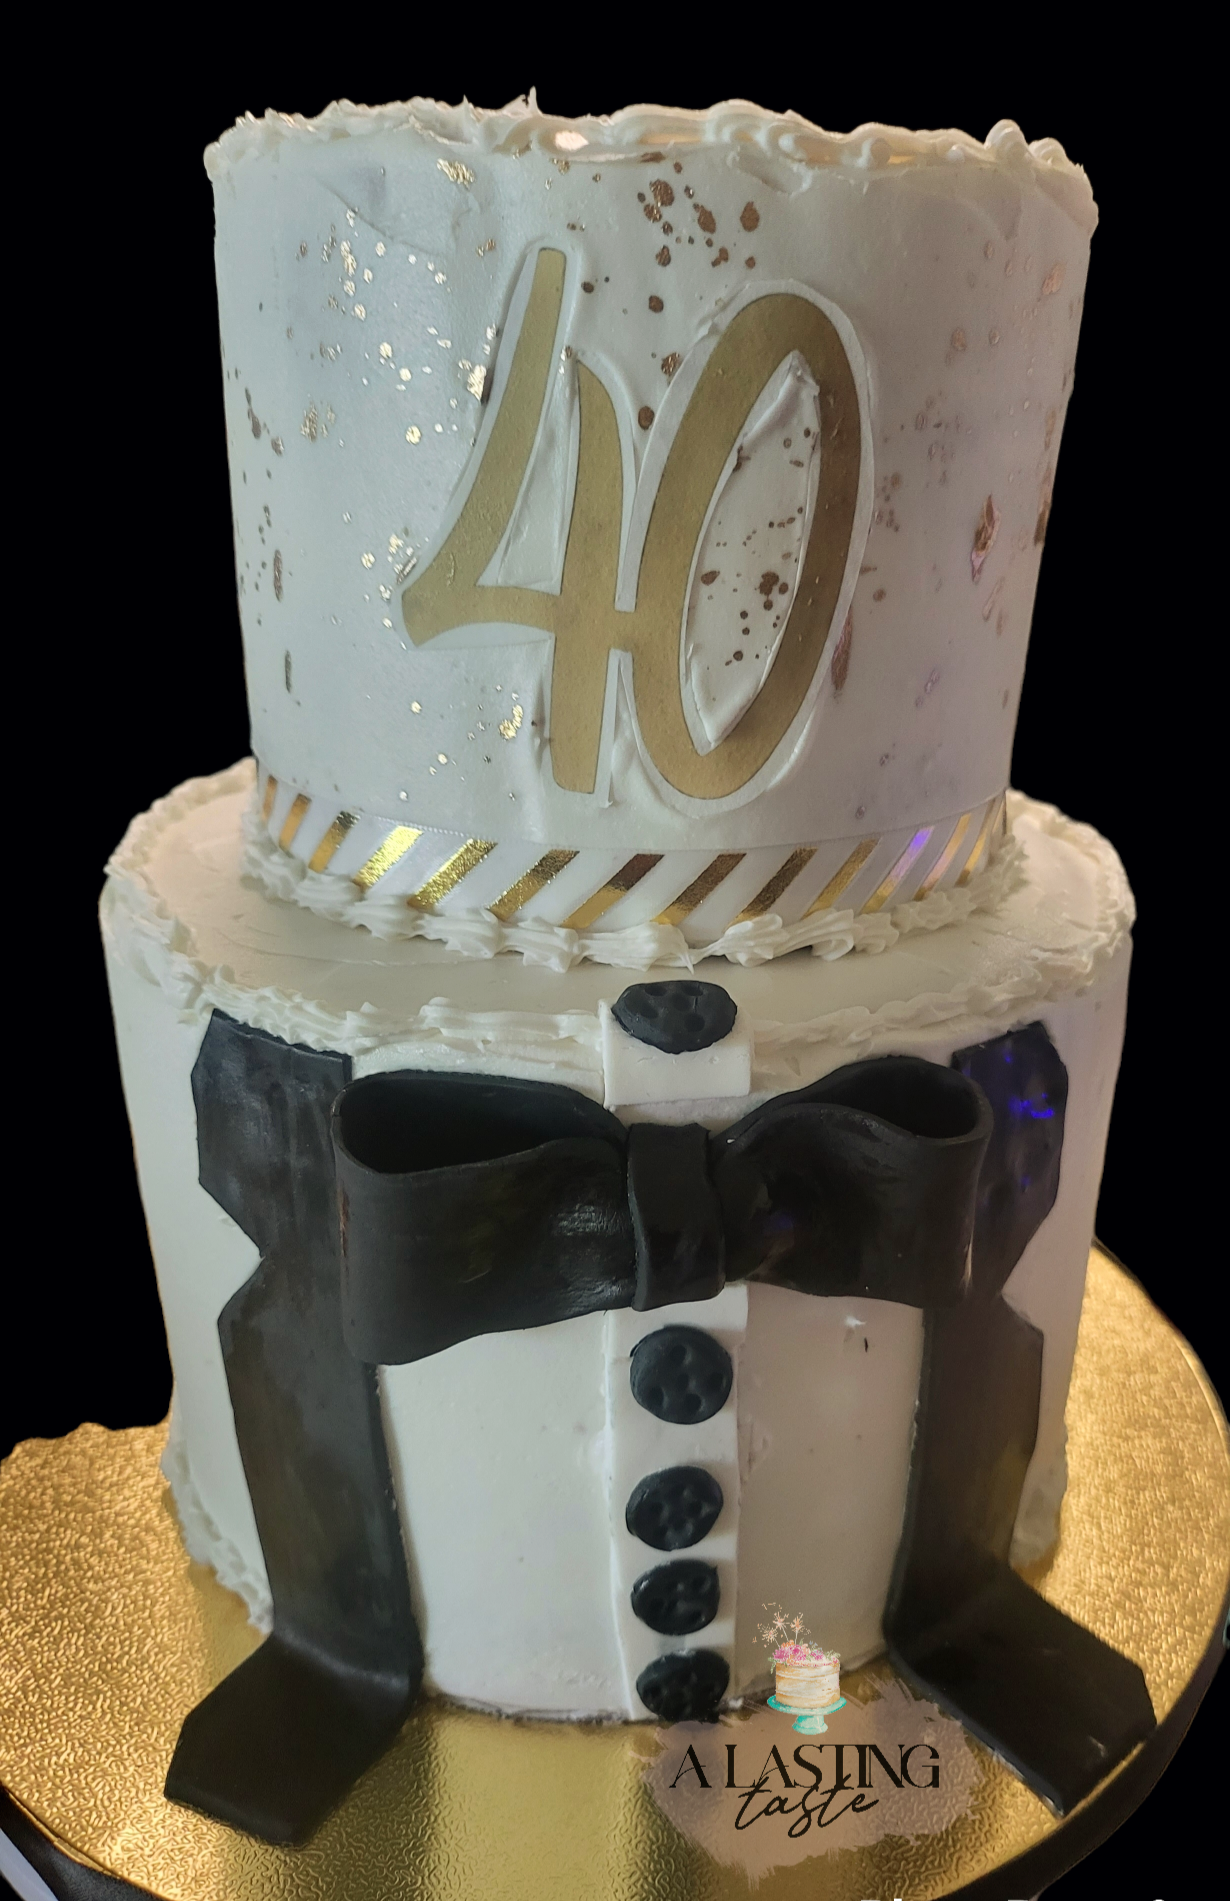 Black and gold themed cake for a special birthday. This is a double  barrelled red velvet cake measuring 8 inches tall, filled with 4 layers of  Swiss, By Anita's Cake Bakery